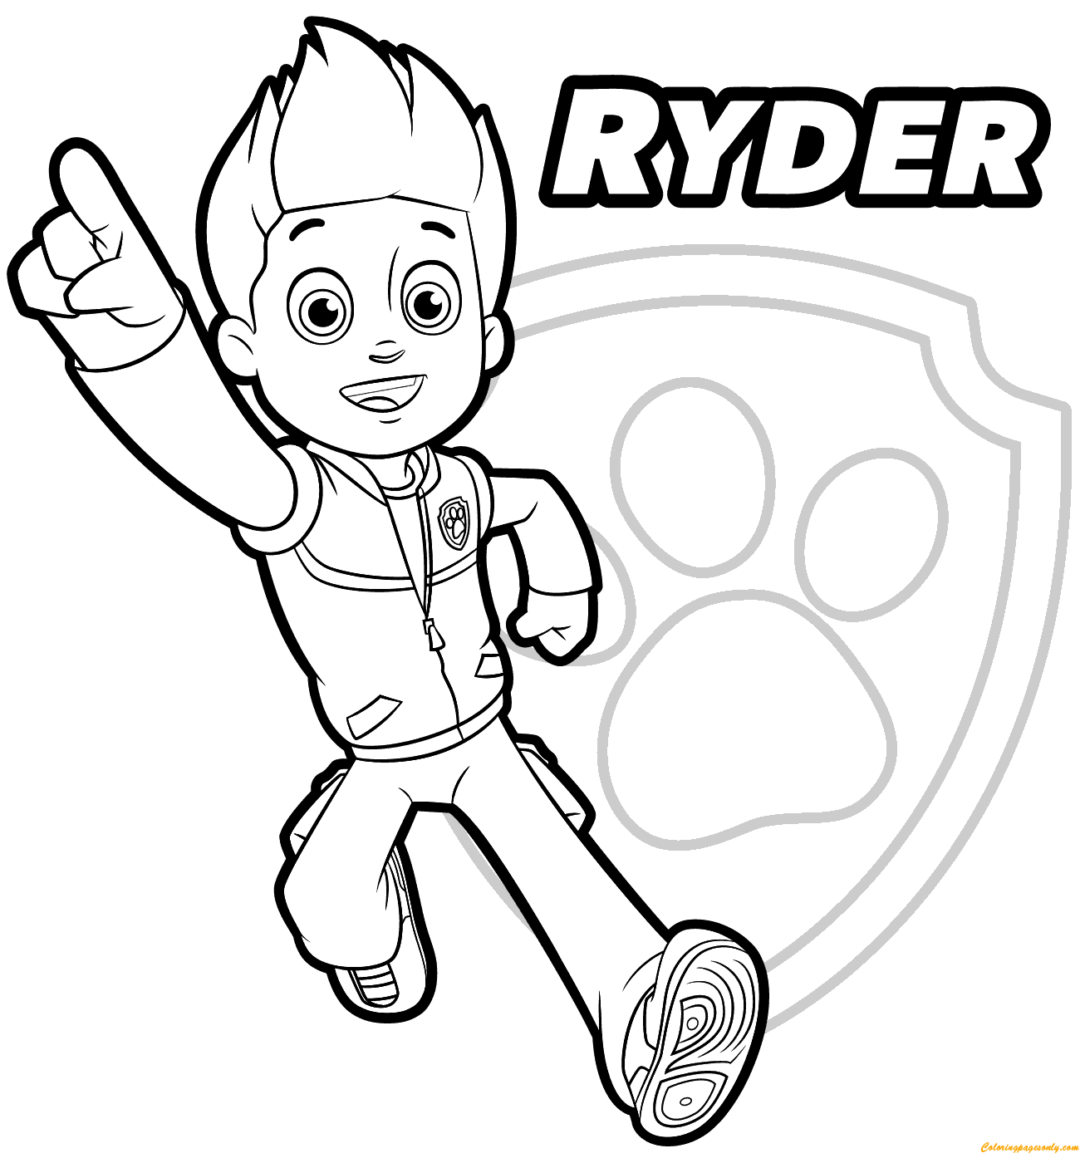 Printable coloring pages paw patrol coloring pages paw patrol coloring ryder paw patrol